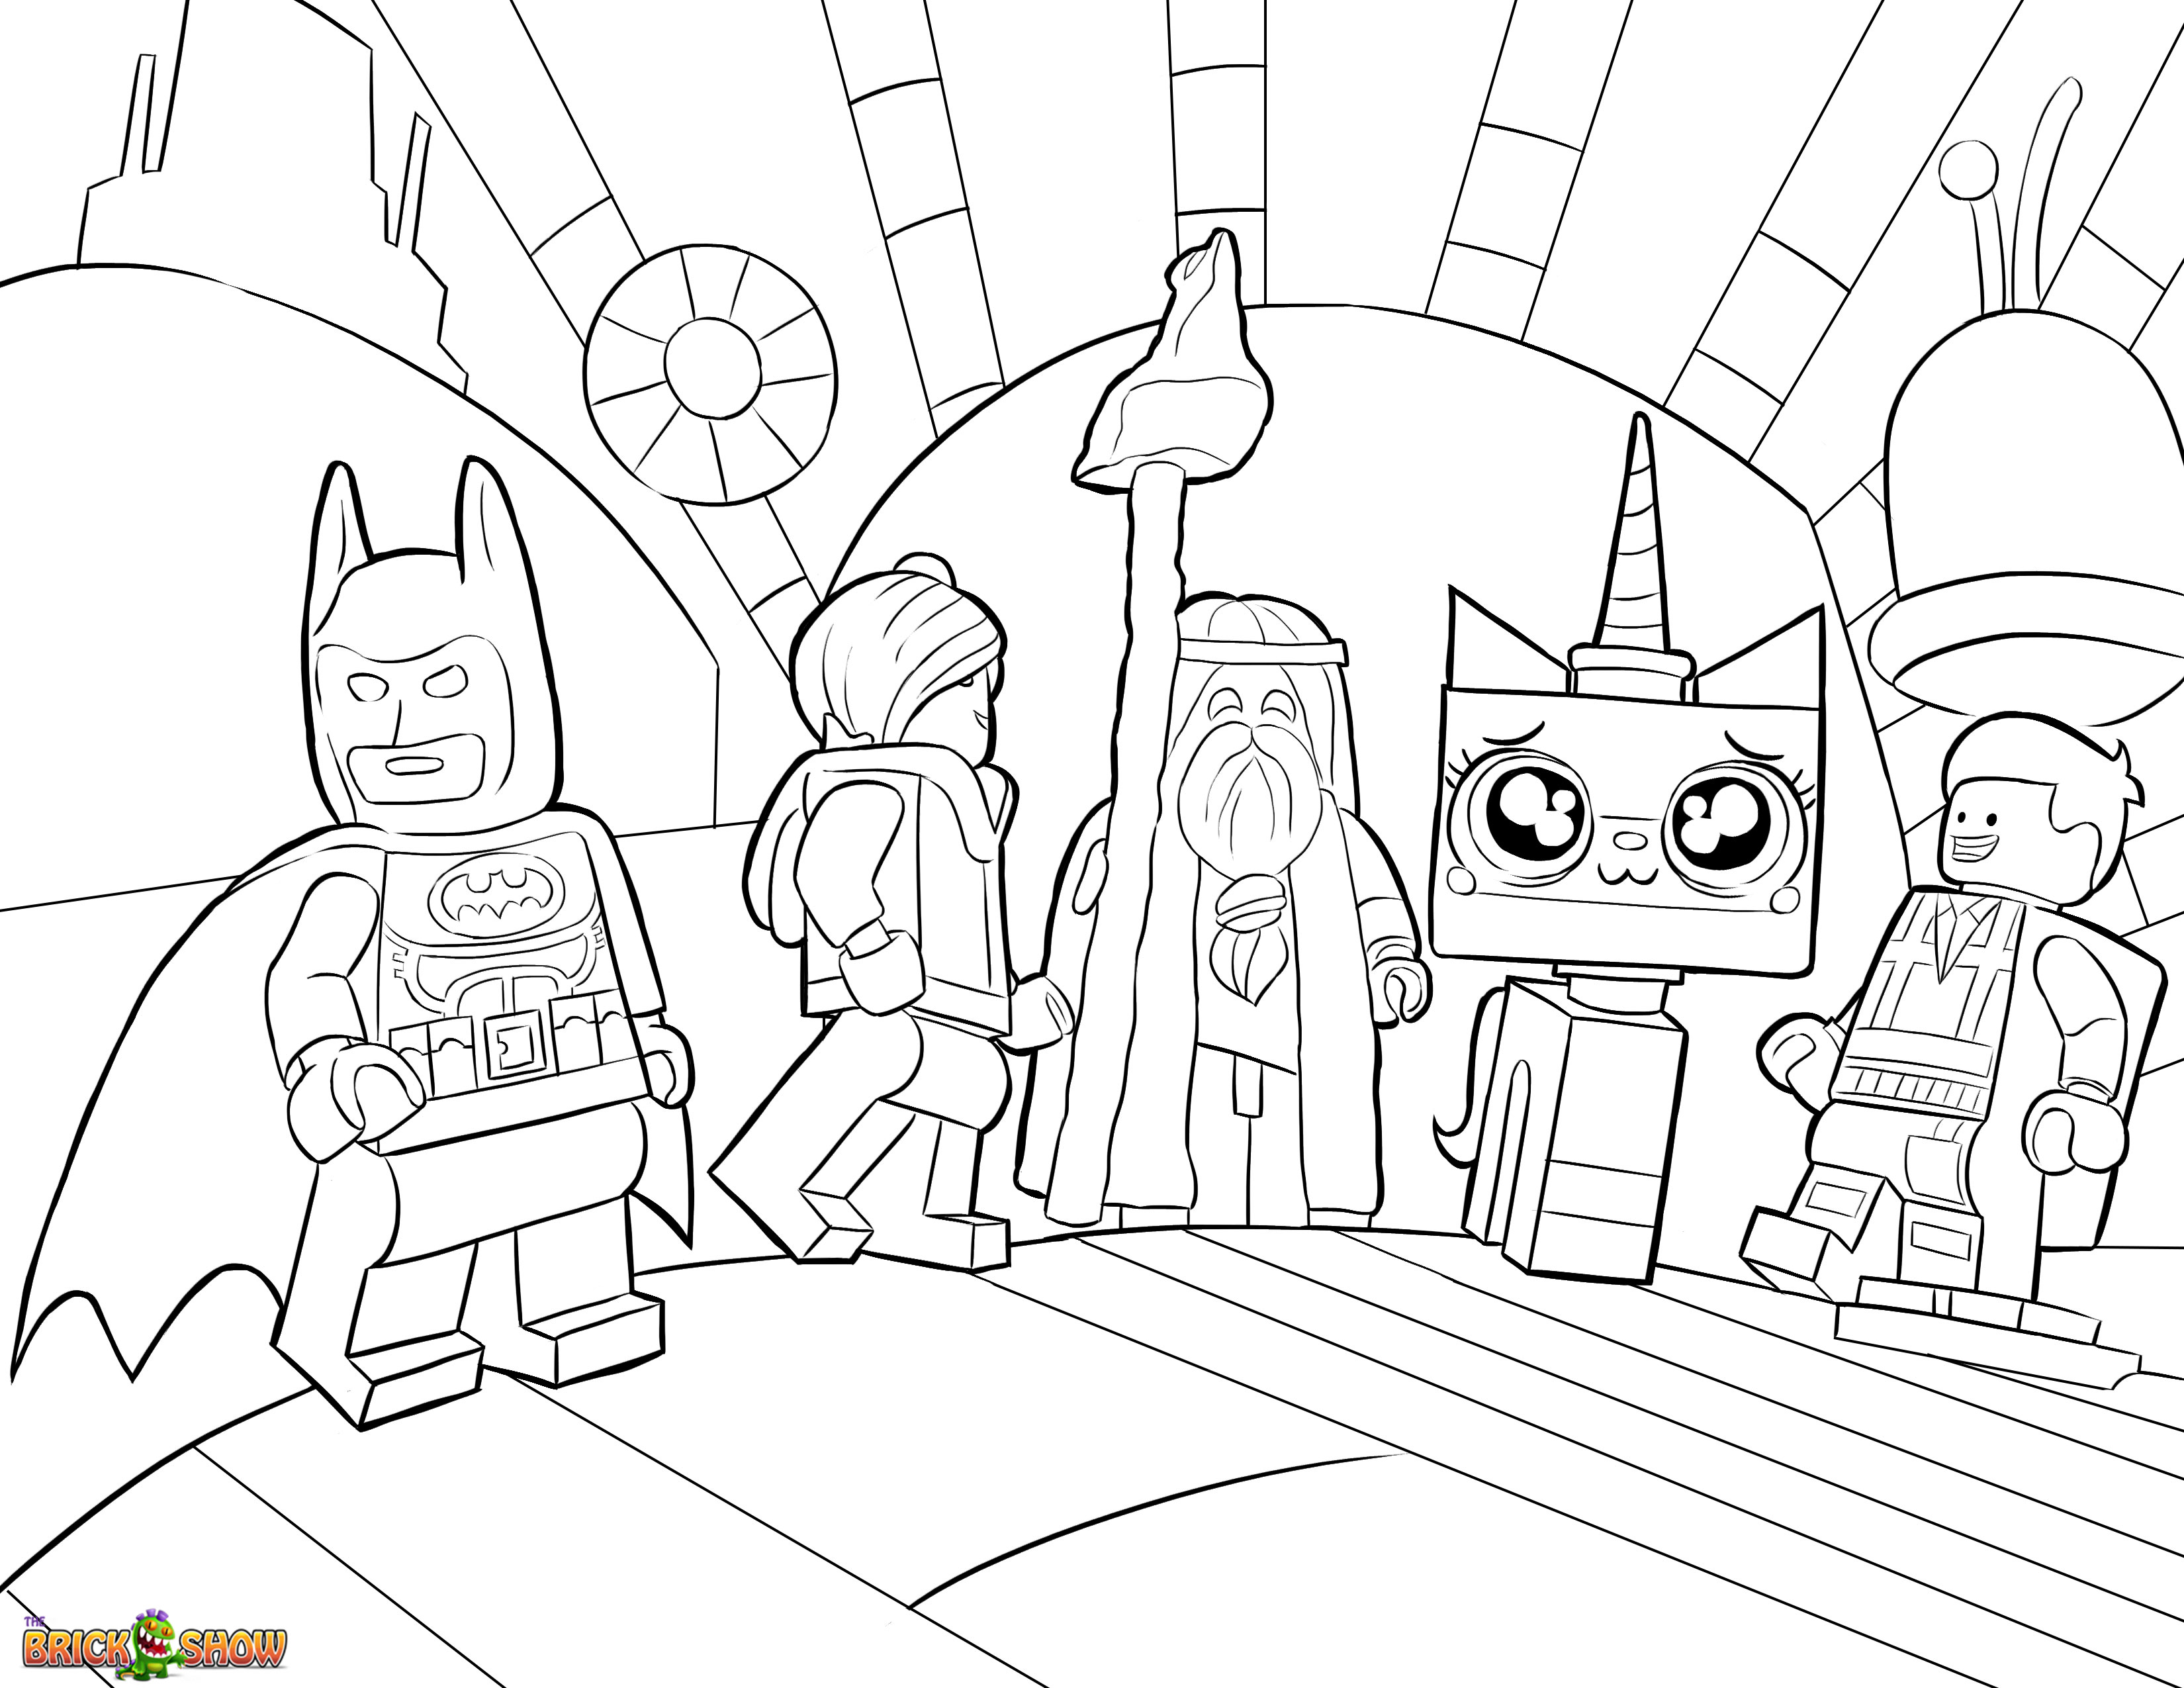 Lego Block Coloring Pages at Free printable